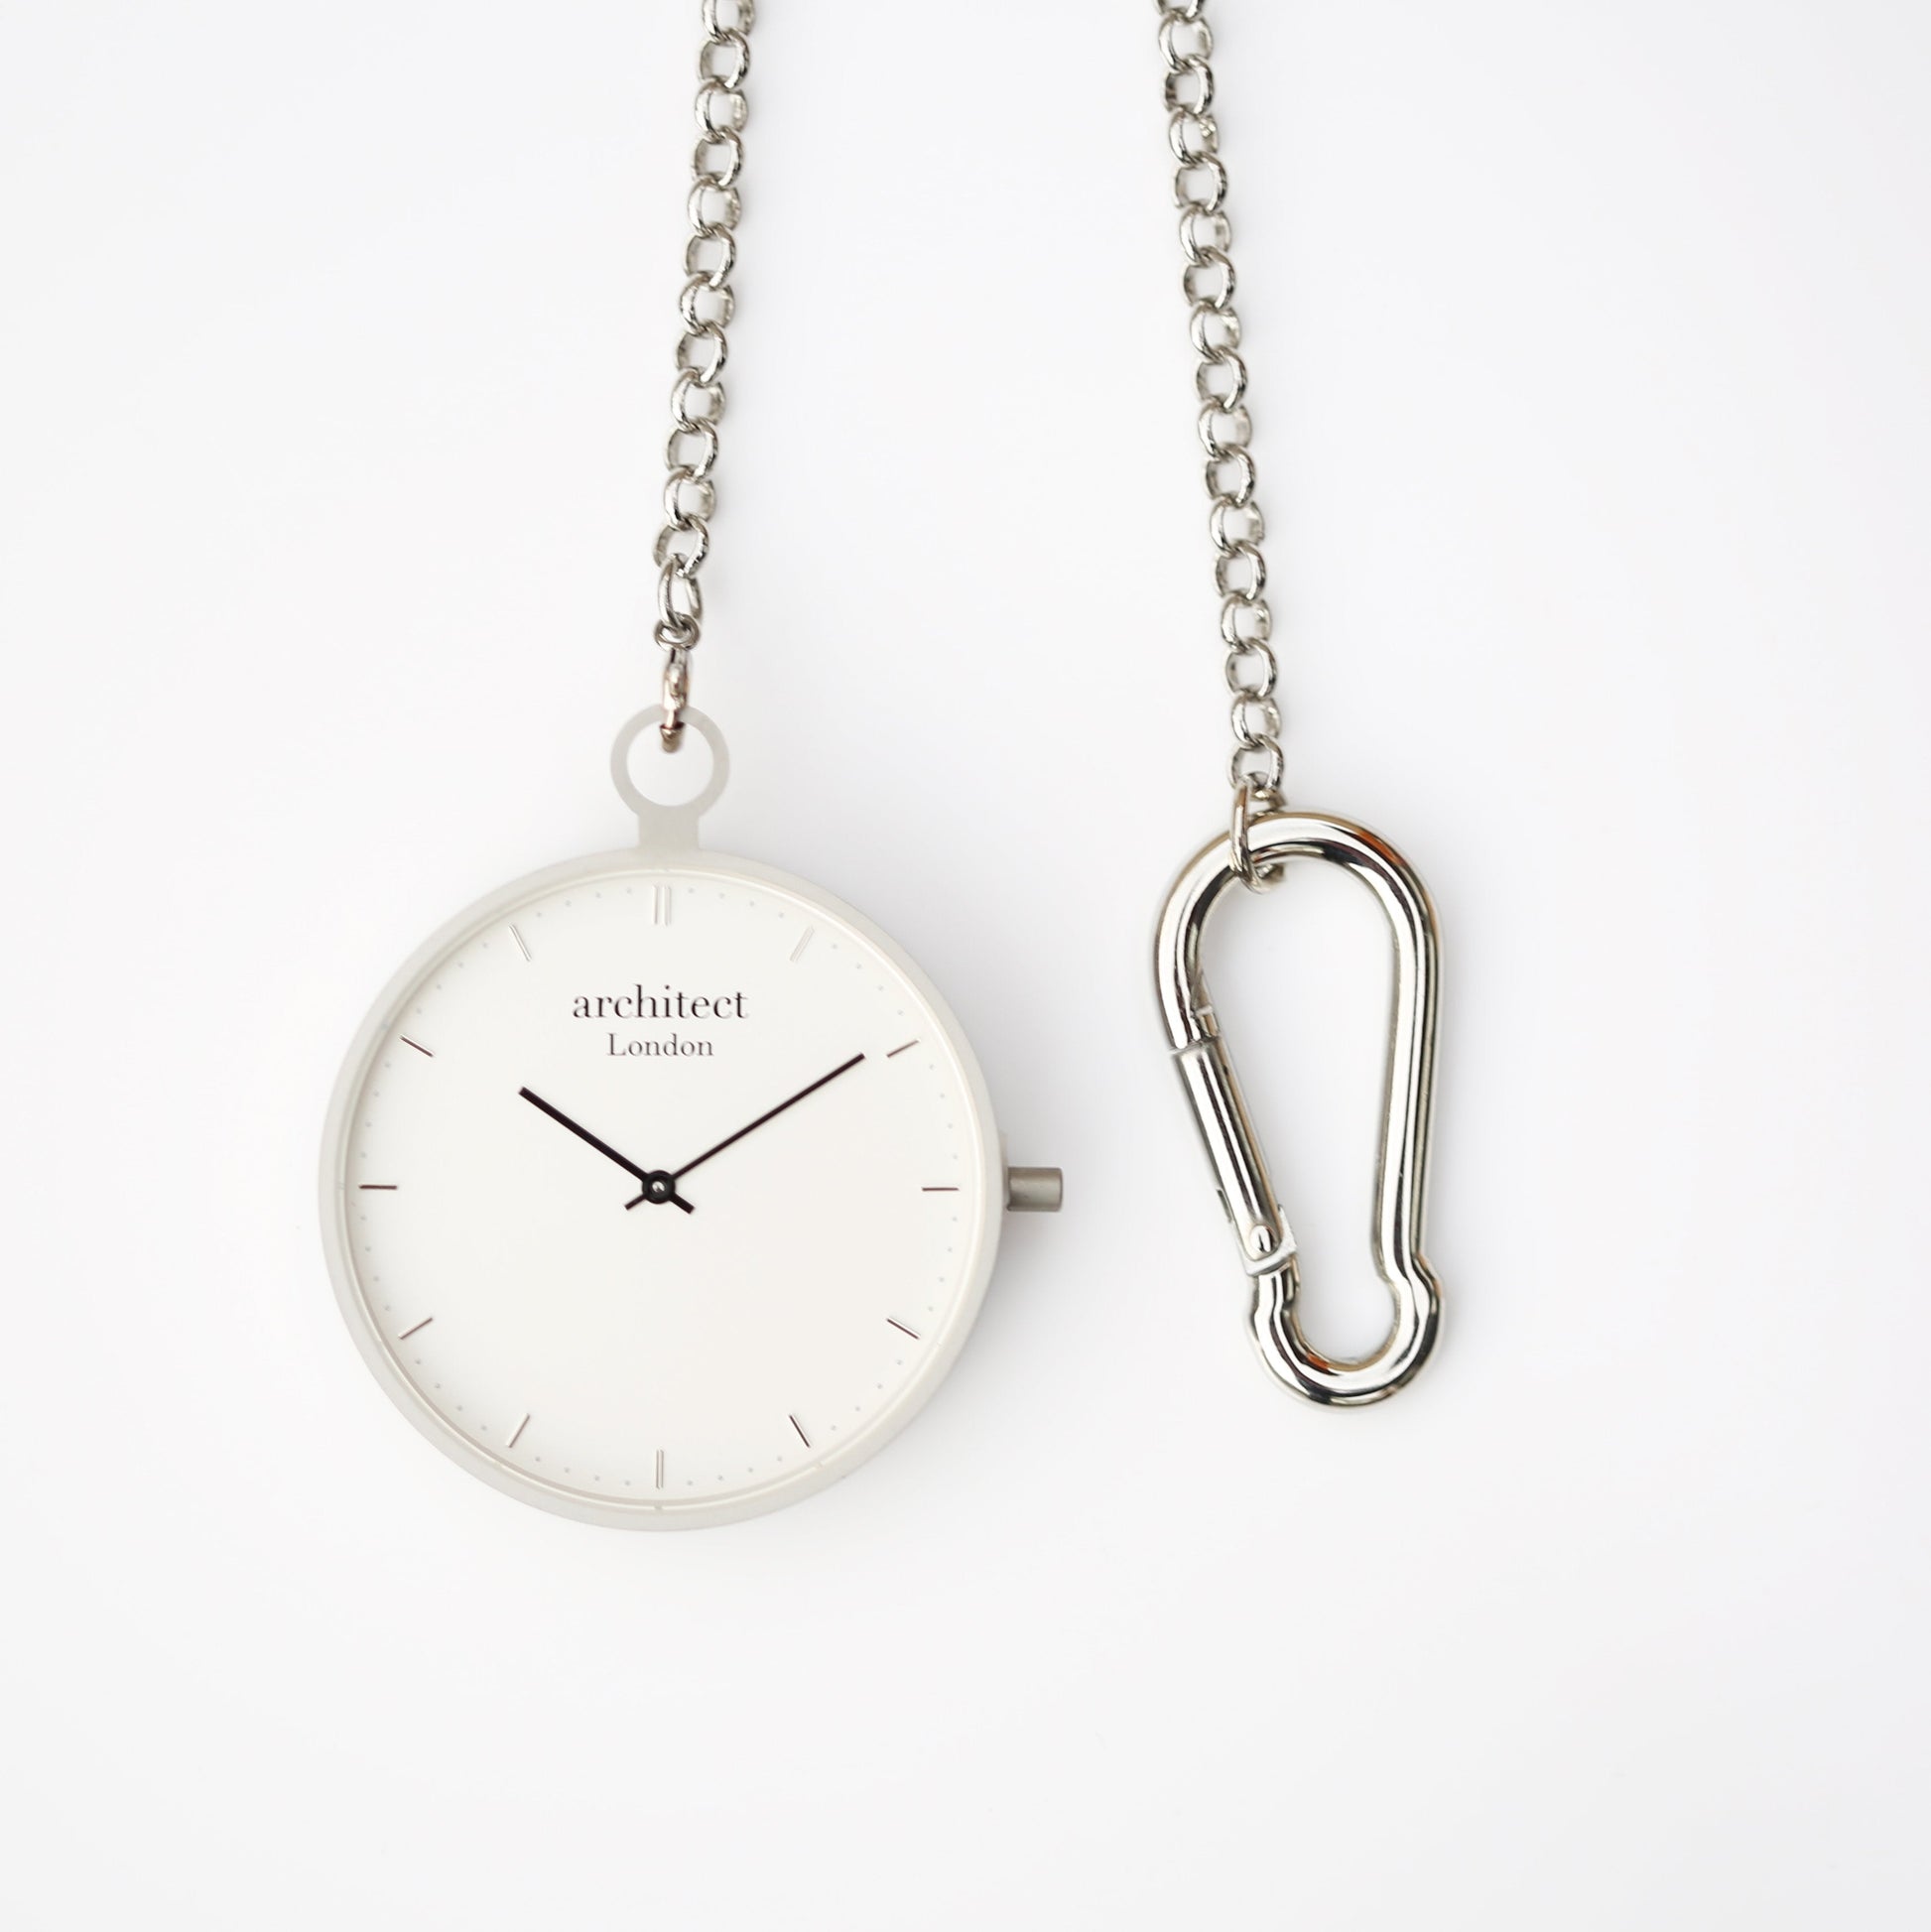 Personalized Pocket Watches - Modern Pocket Watch Silver - Handwriting Engraving 